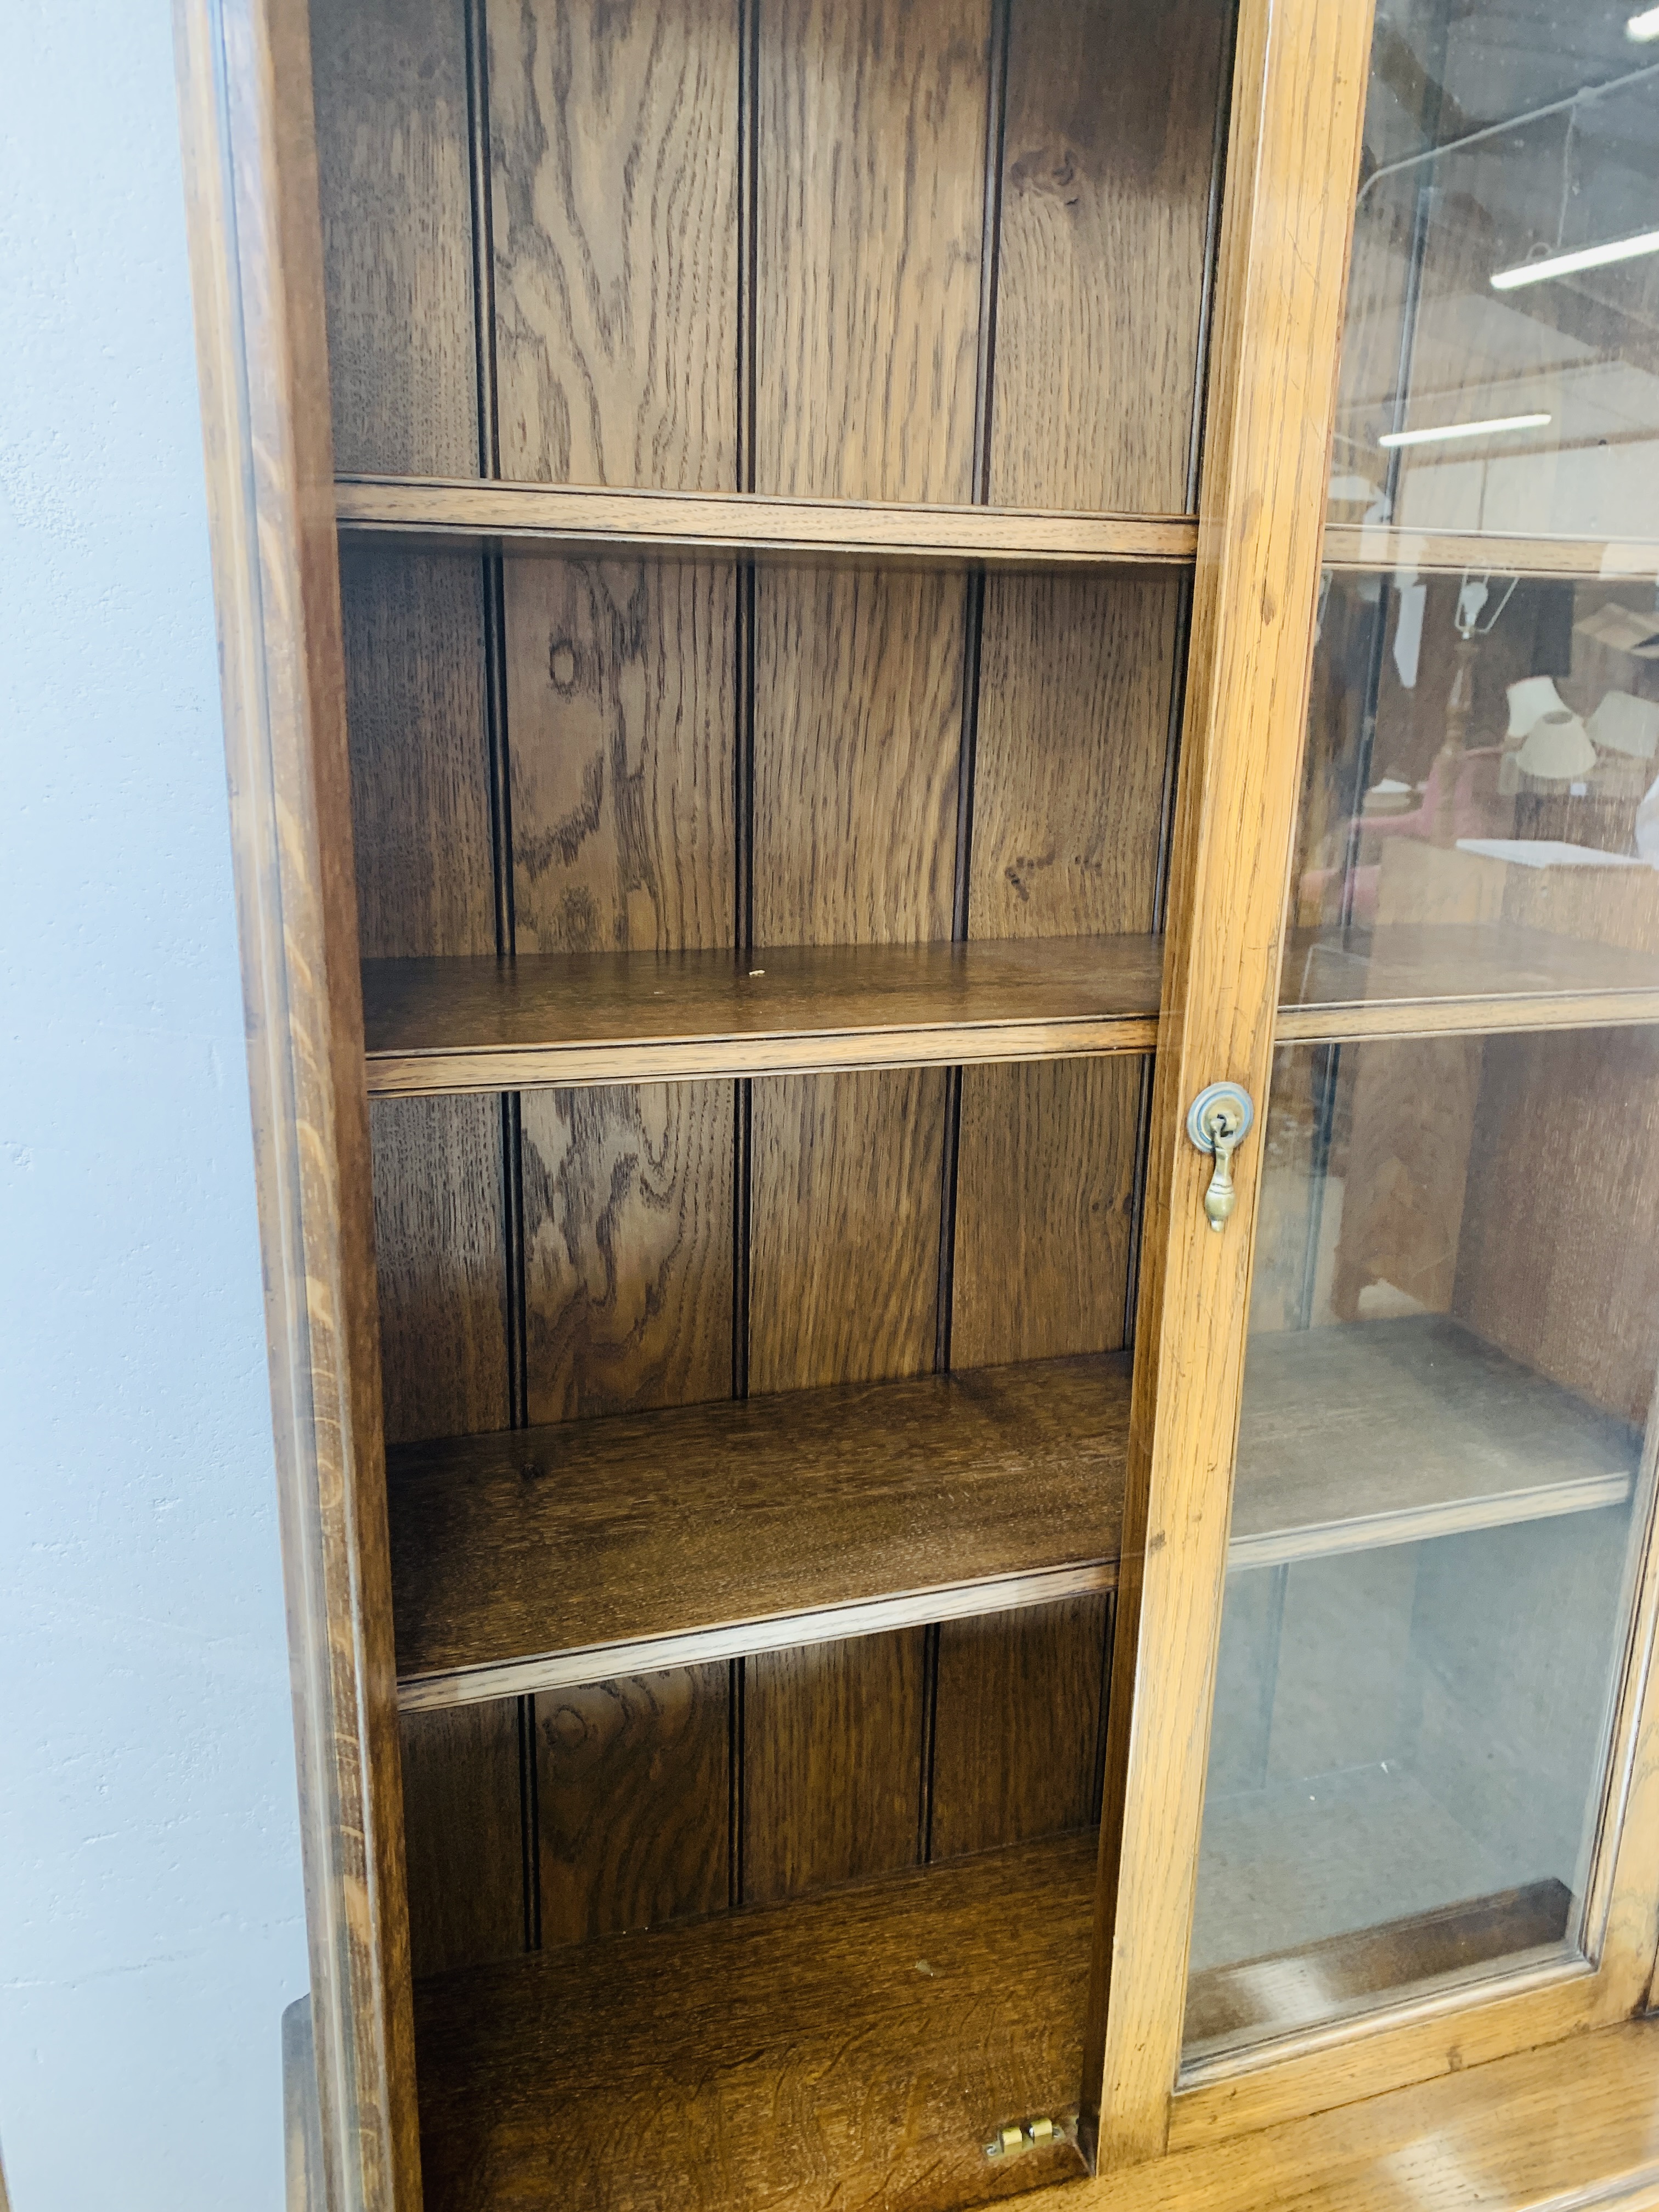 A QUALITY REPRODUCTION OAK BOOKCASE WITH CUPBOARD BASE BY DAVID NOTTAGE CABINET MAKER - W 75cm. - Image 10 of 14